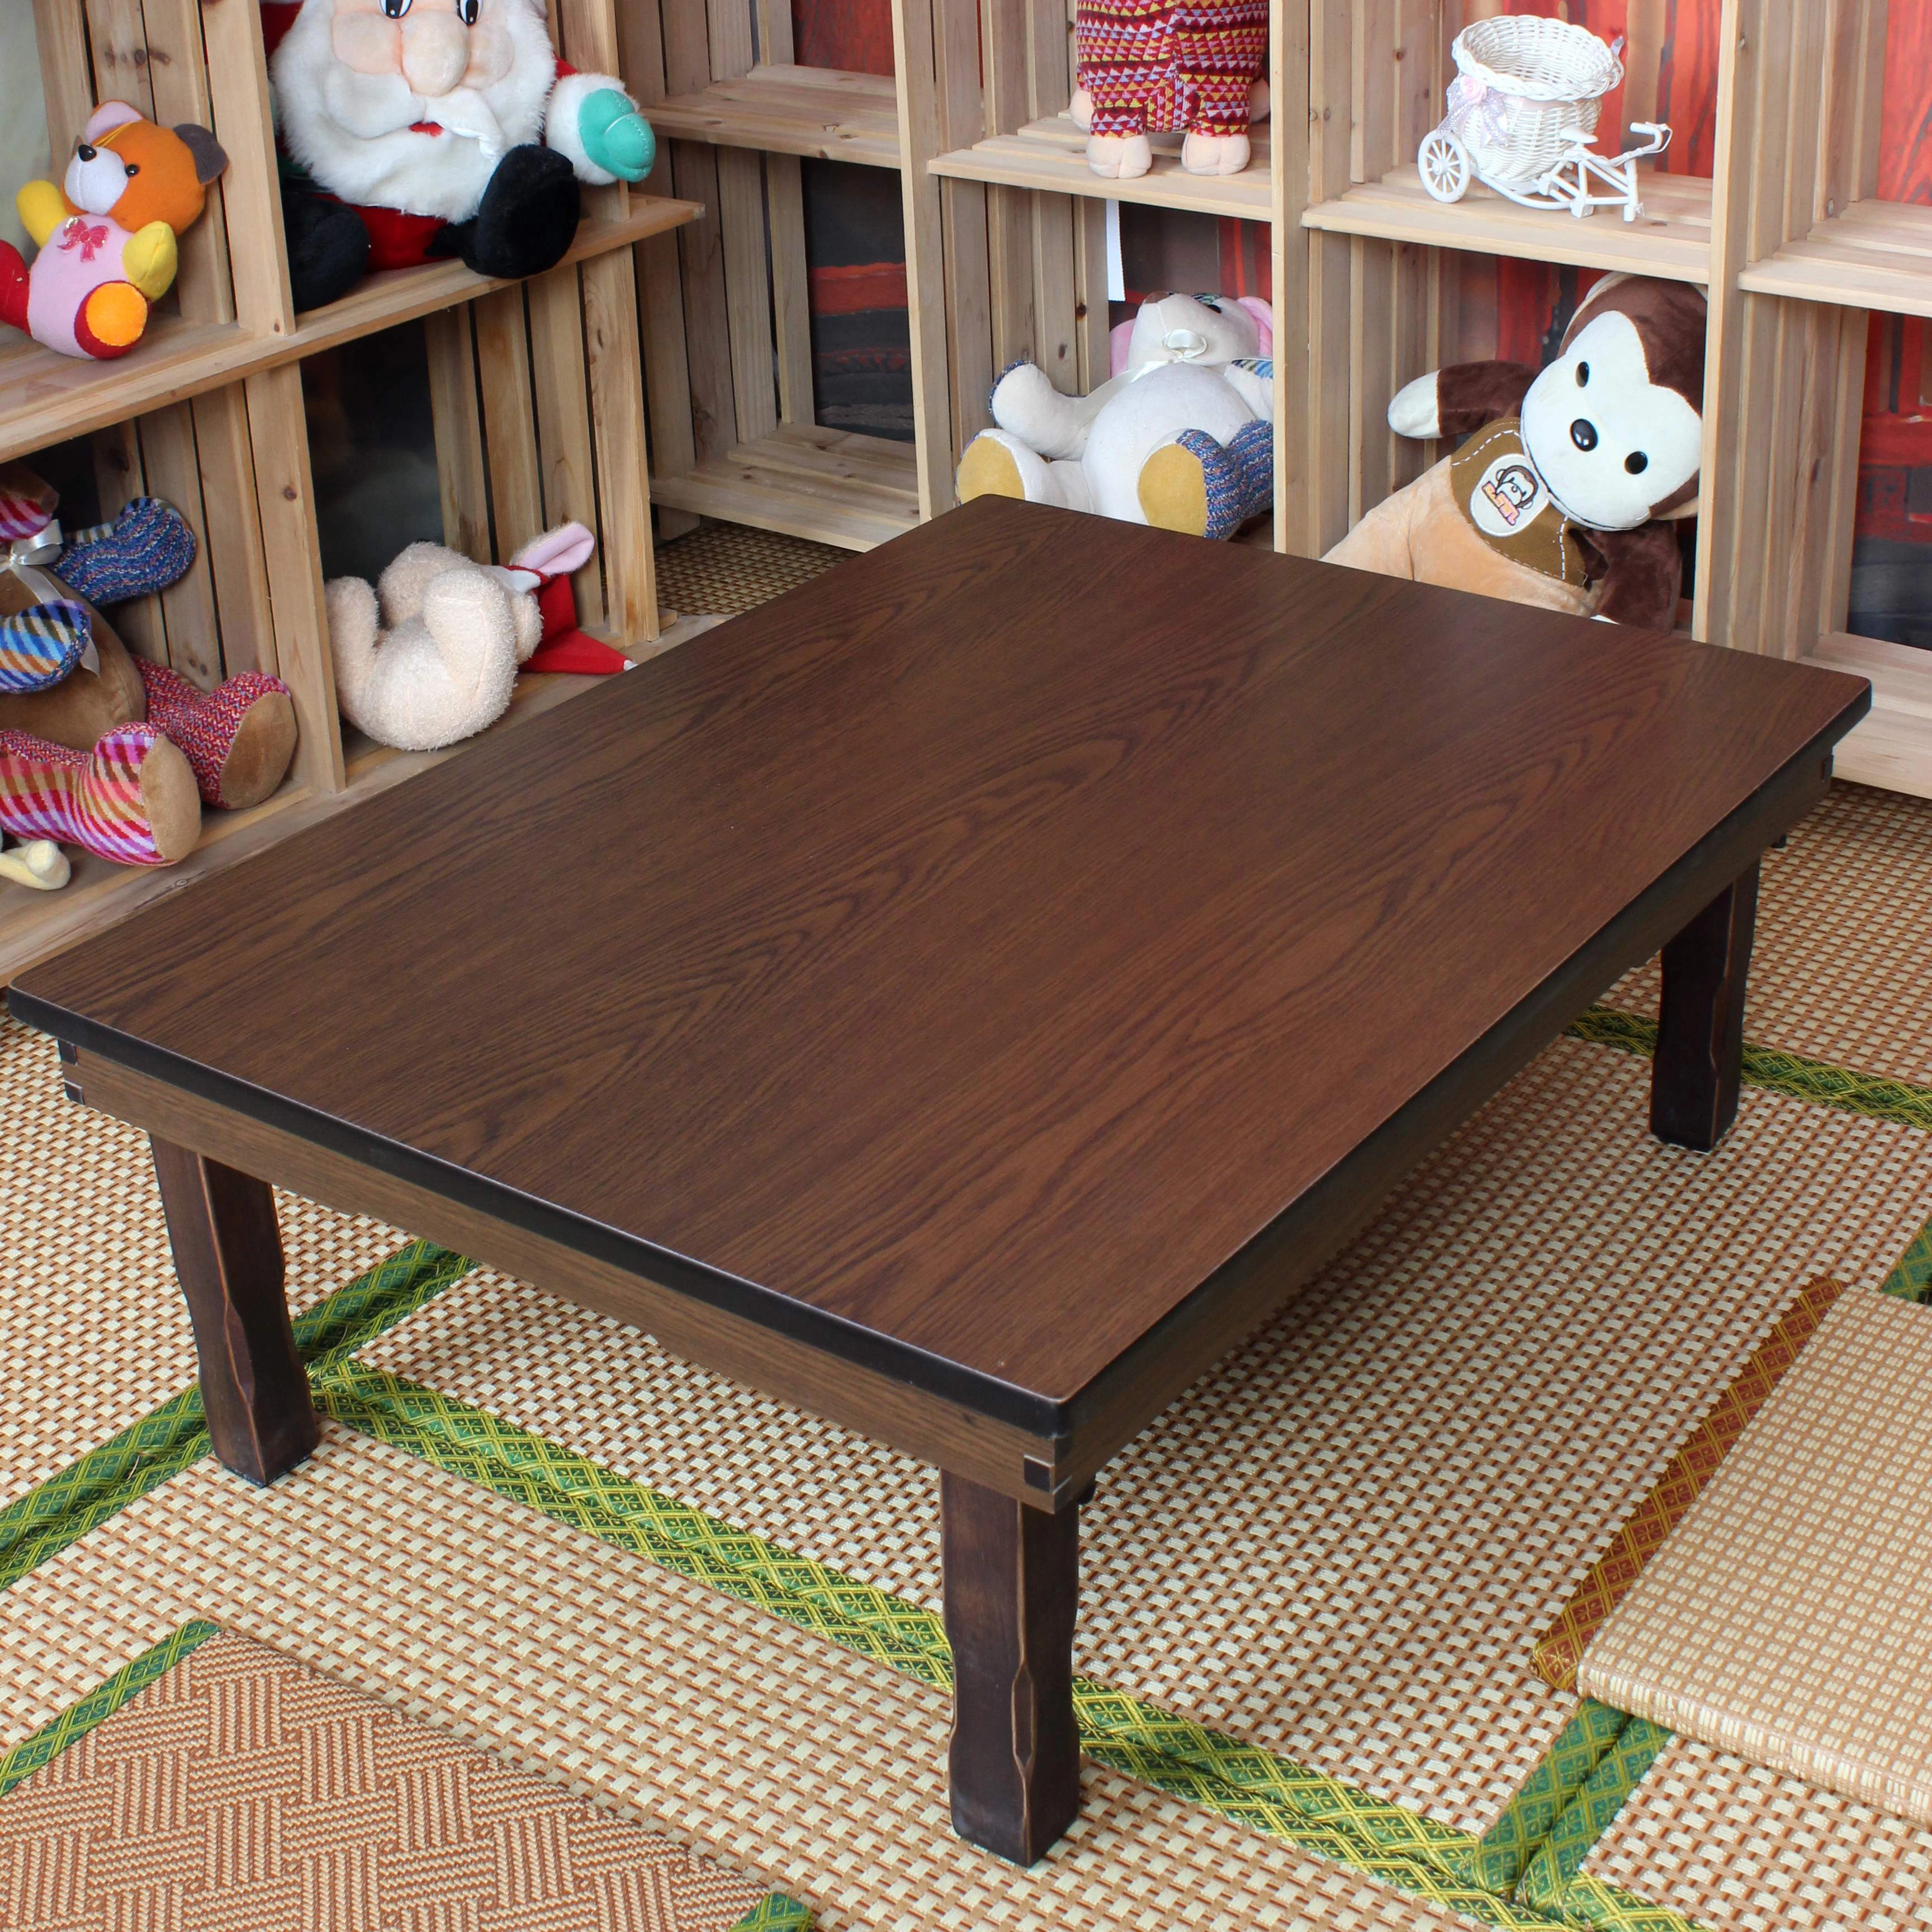 Antique Korean Coffee Tea Table Folding Leg Asian Style Living Room Foldable Furniture Floor Traditional Dining Table Wooden Coffee Tables Aliexpress